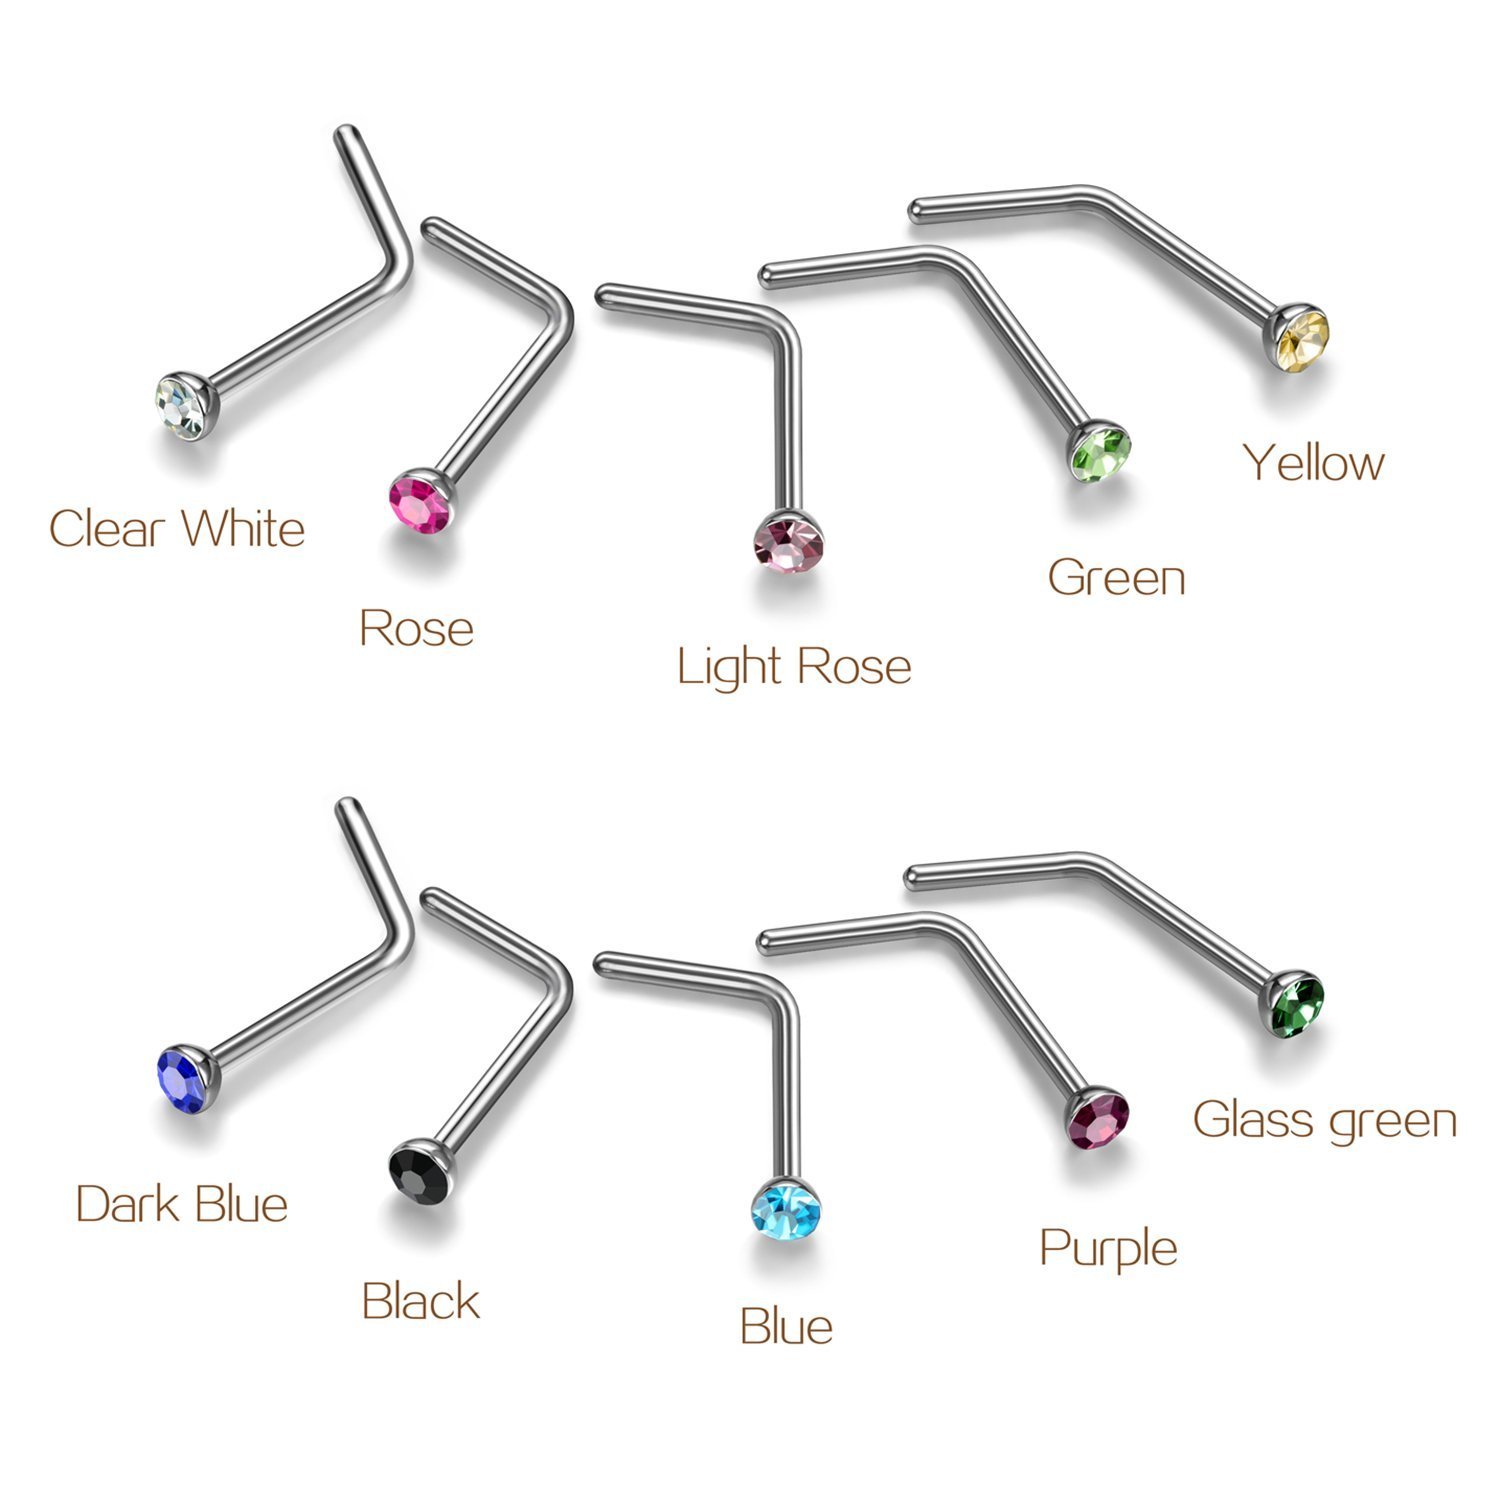 Charisma Small Nose Studs Stainless Steel Curved Nose Stud Bend L Shape Colorful Nose Ring Screw Piercing Jewelry Tiny Bone Studs for Women Men Hypoallergenic 20G